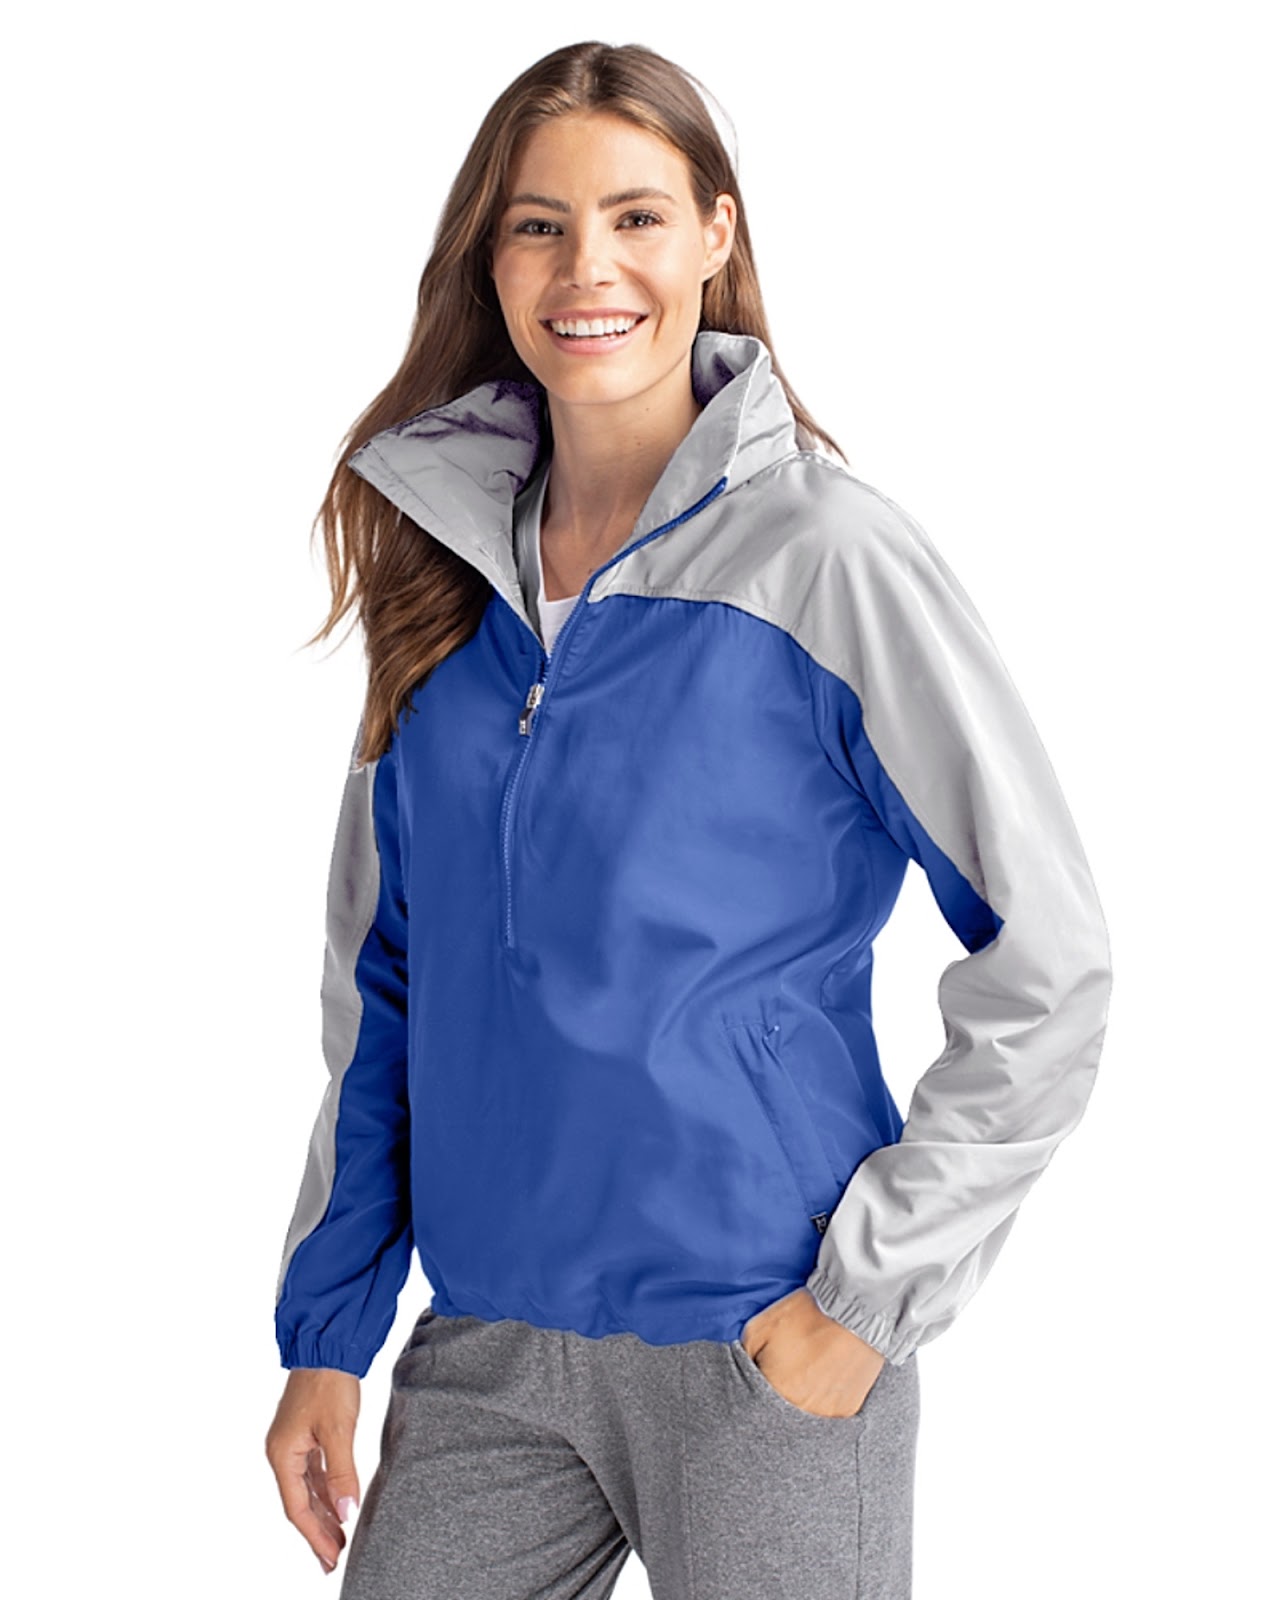 Women's rain jacket for the gym